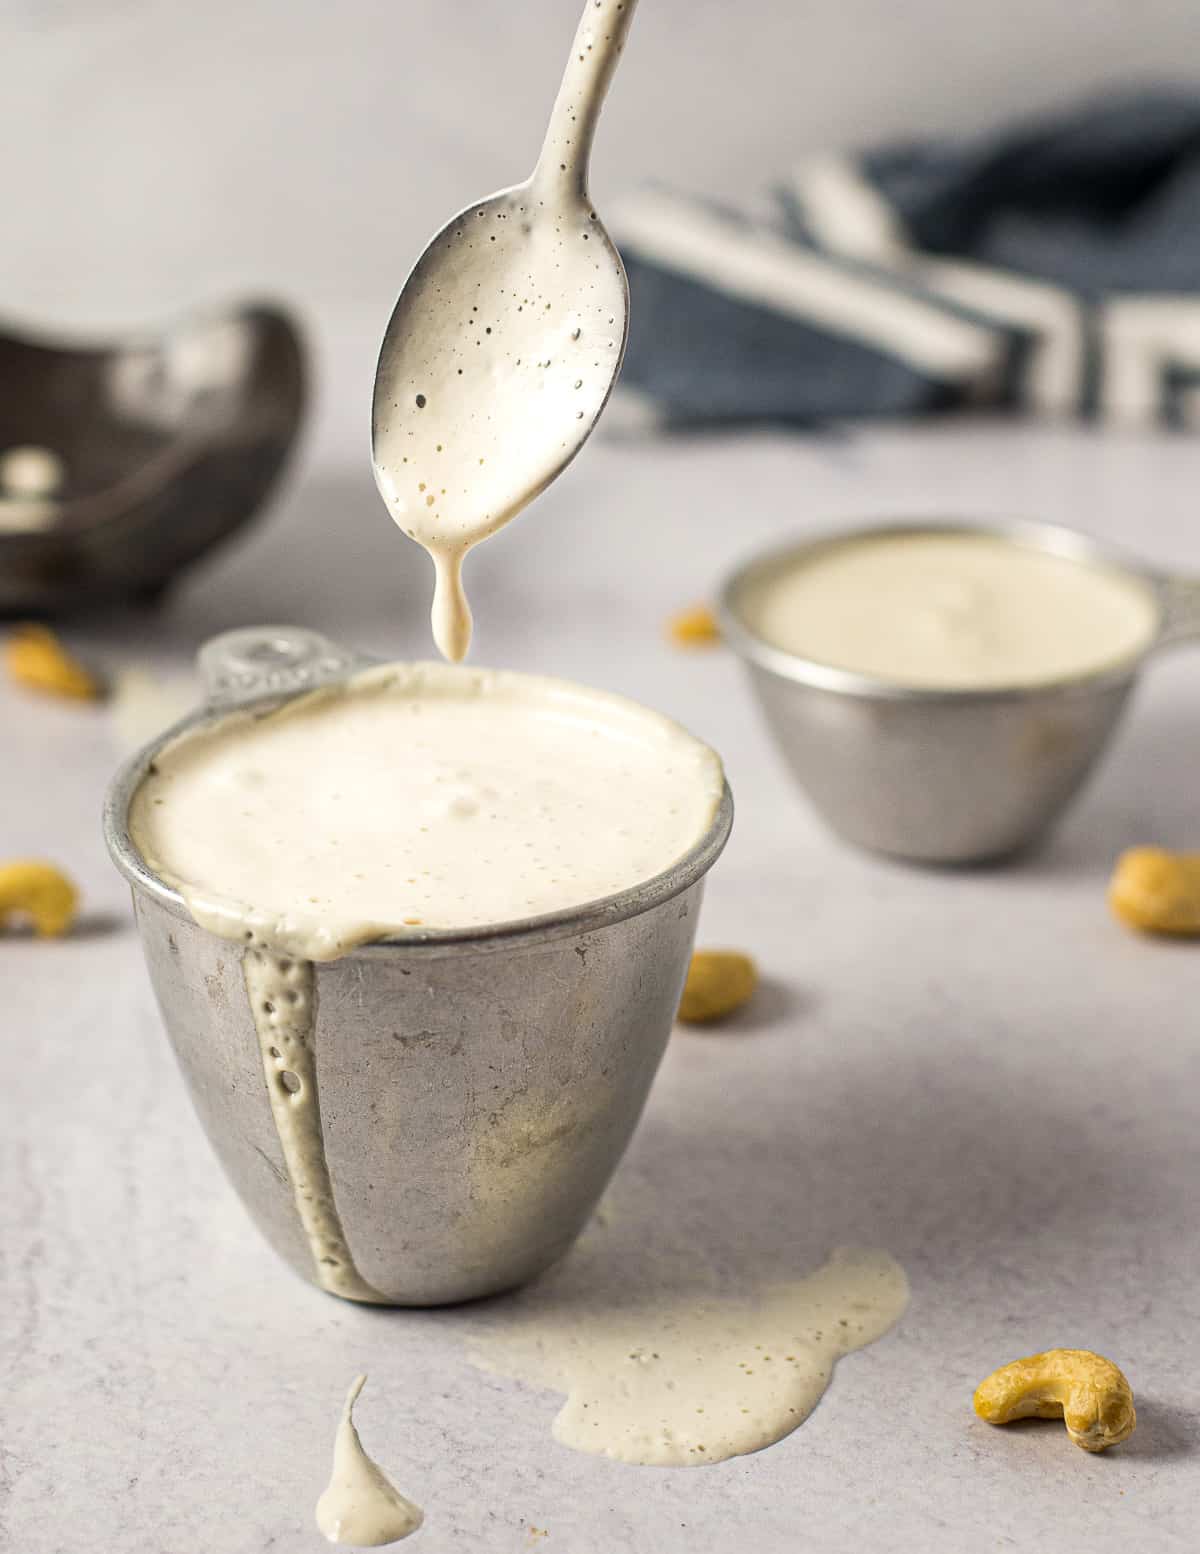 vegan heavy cream dripping from a spoon